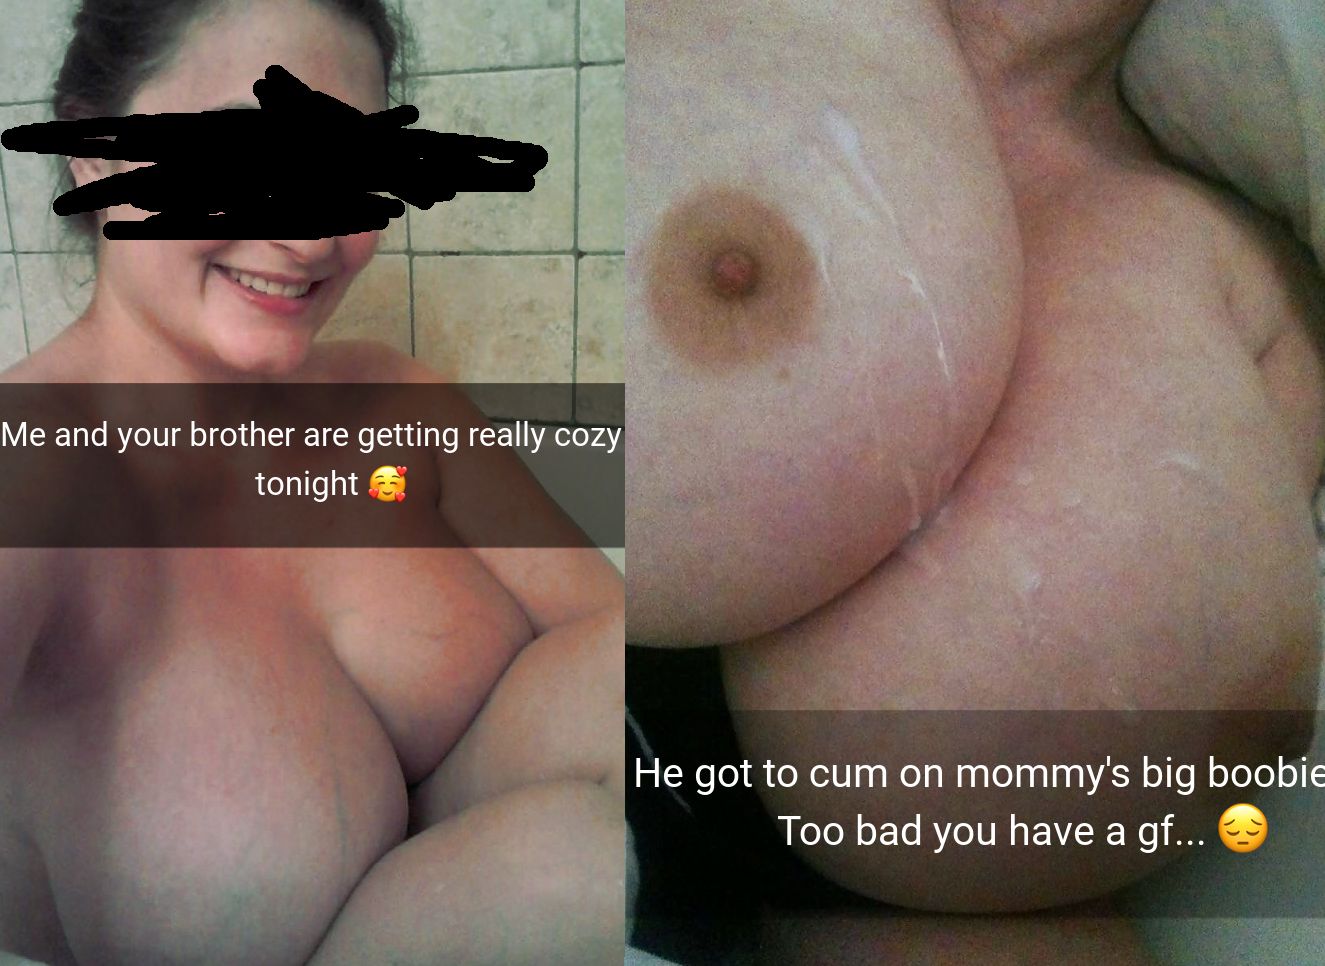 Girls nudes from snapchat official page